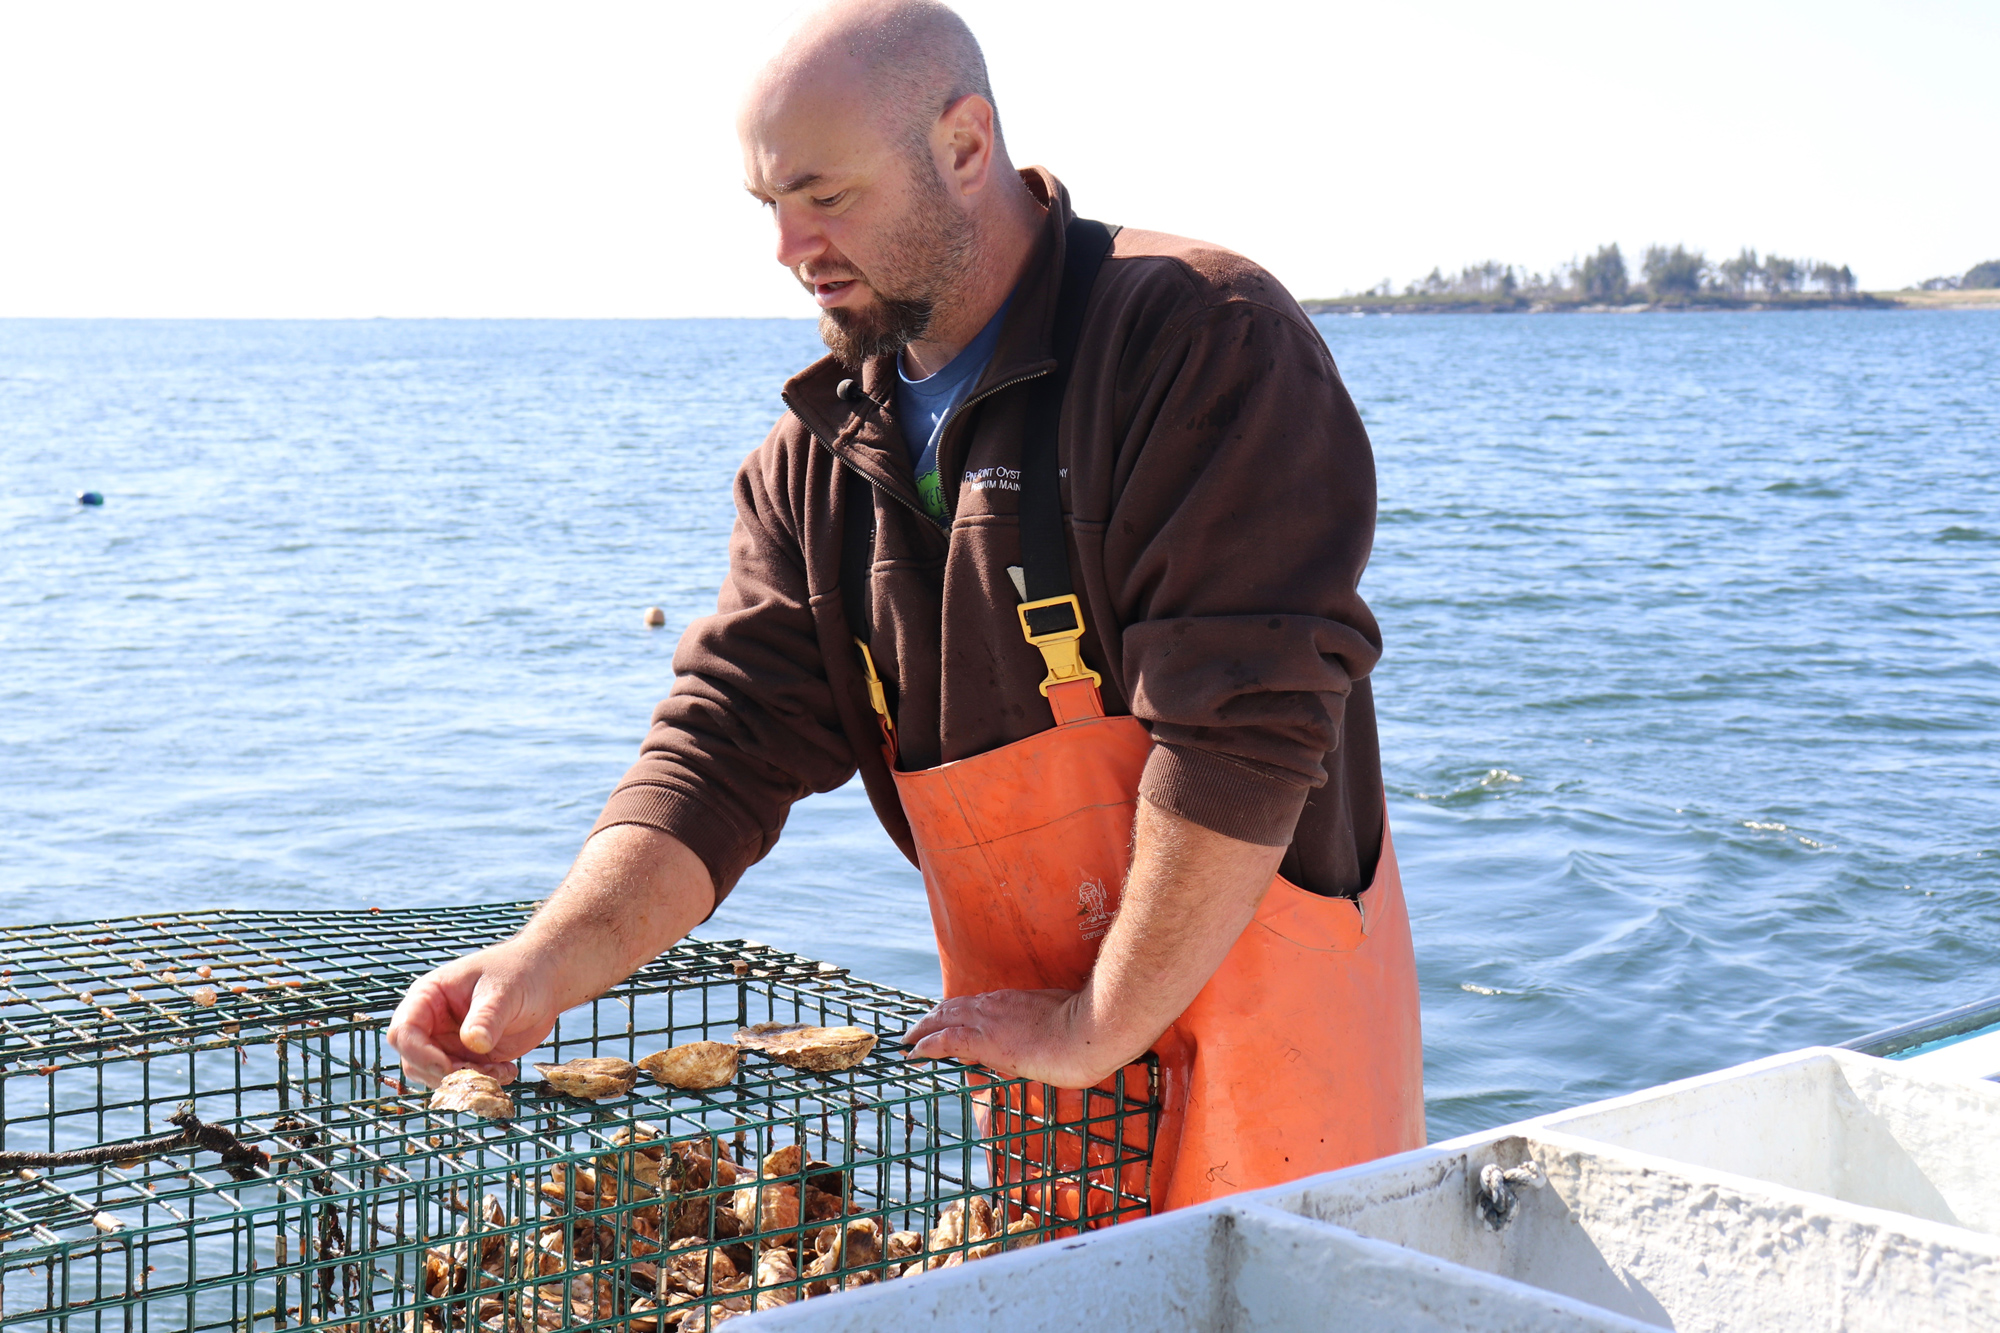 man on the shore assisting with oyster farming